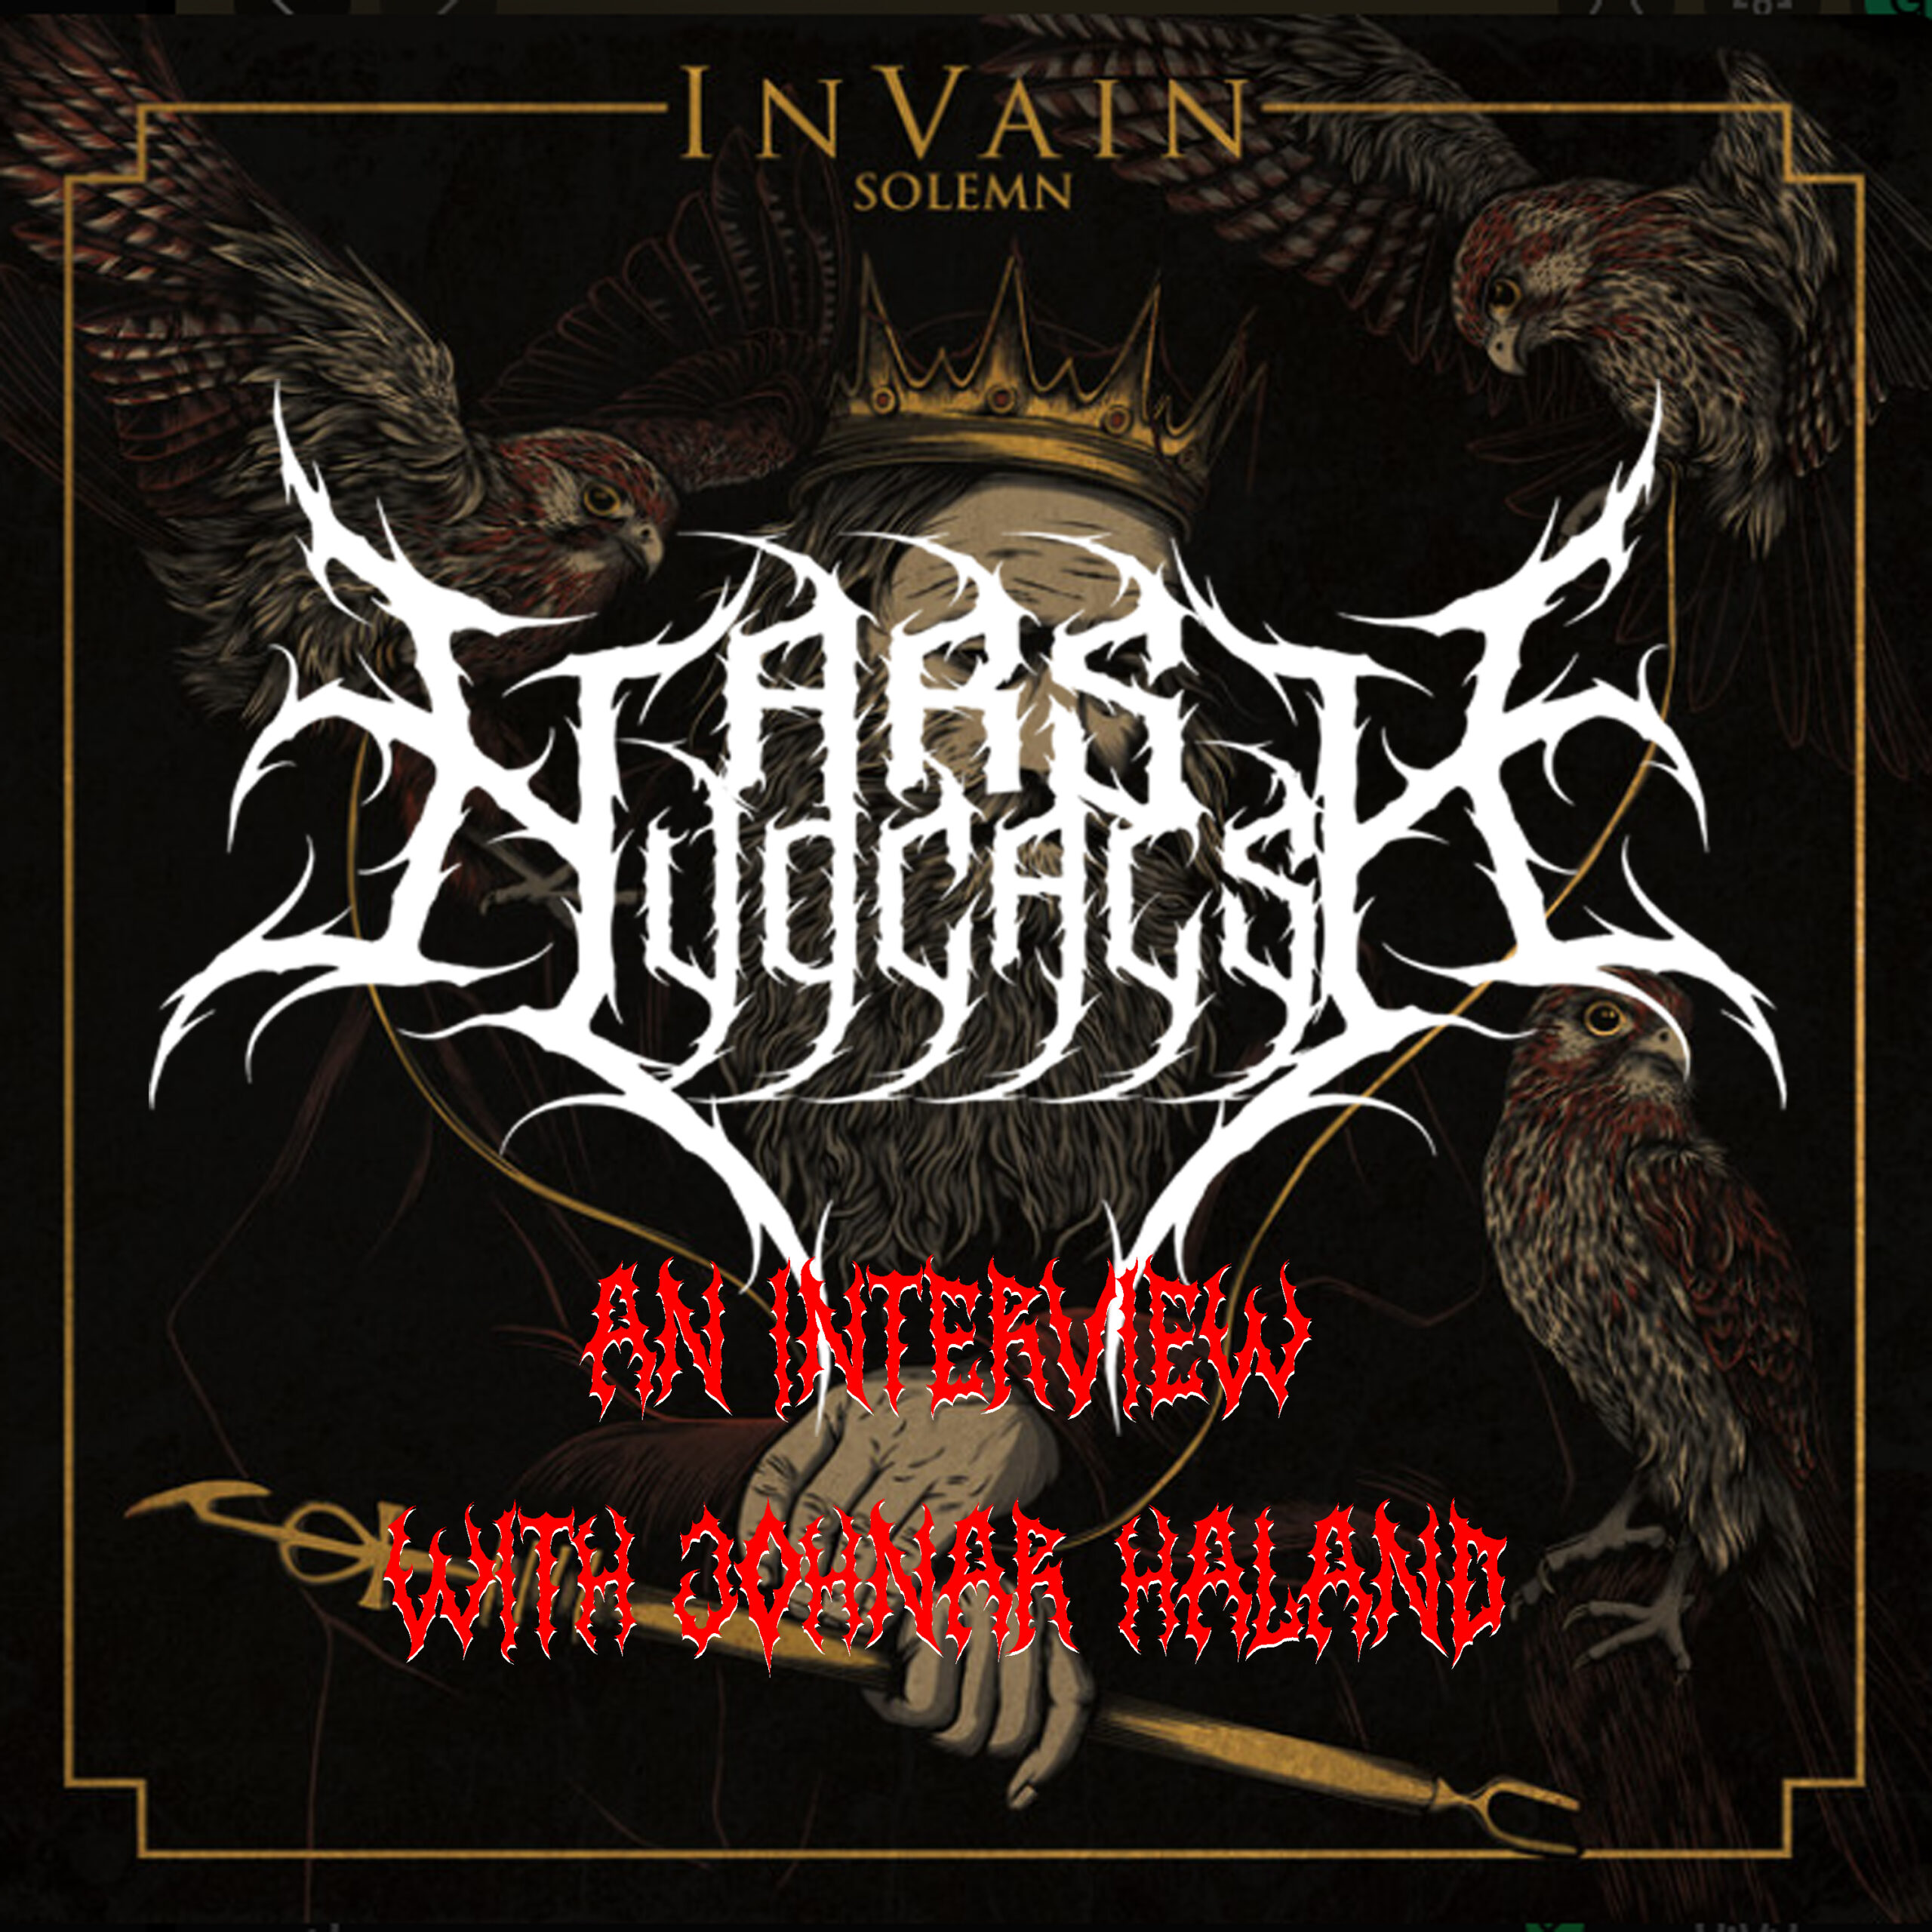 Harsh Vocals – An Interview with Johnar Håland of In Vain